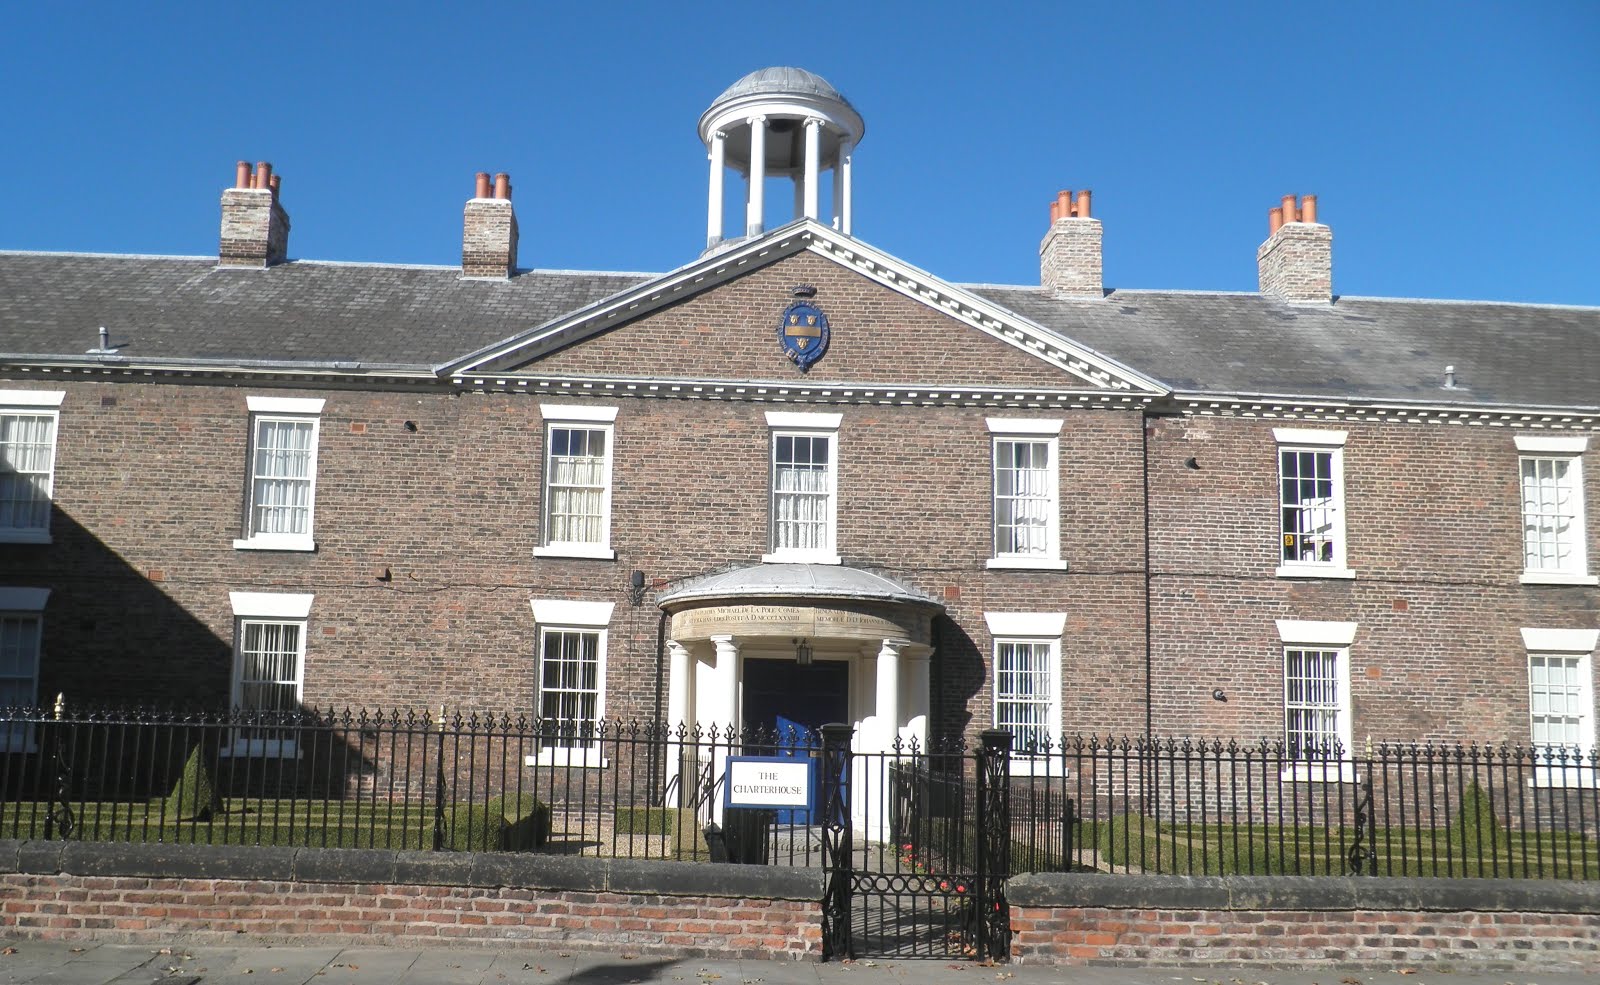 The 1780 building today